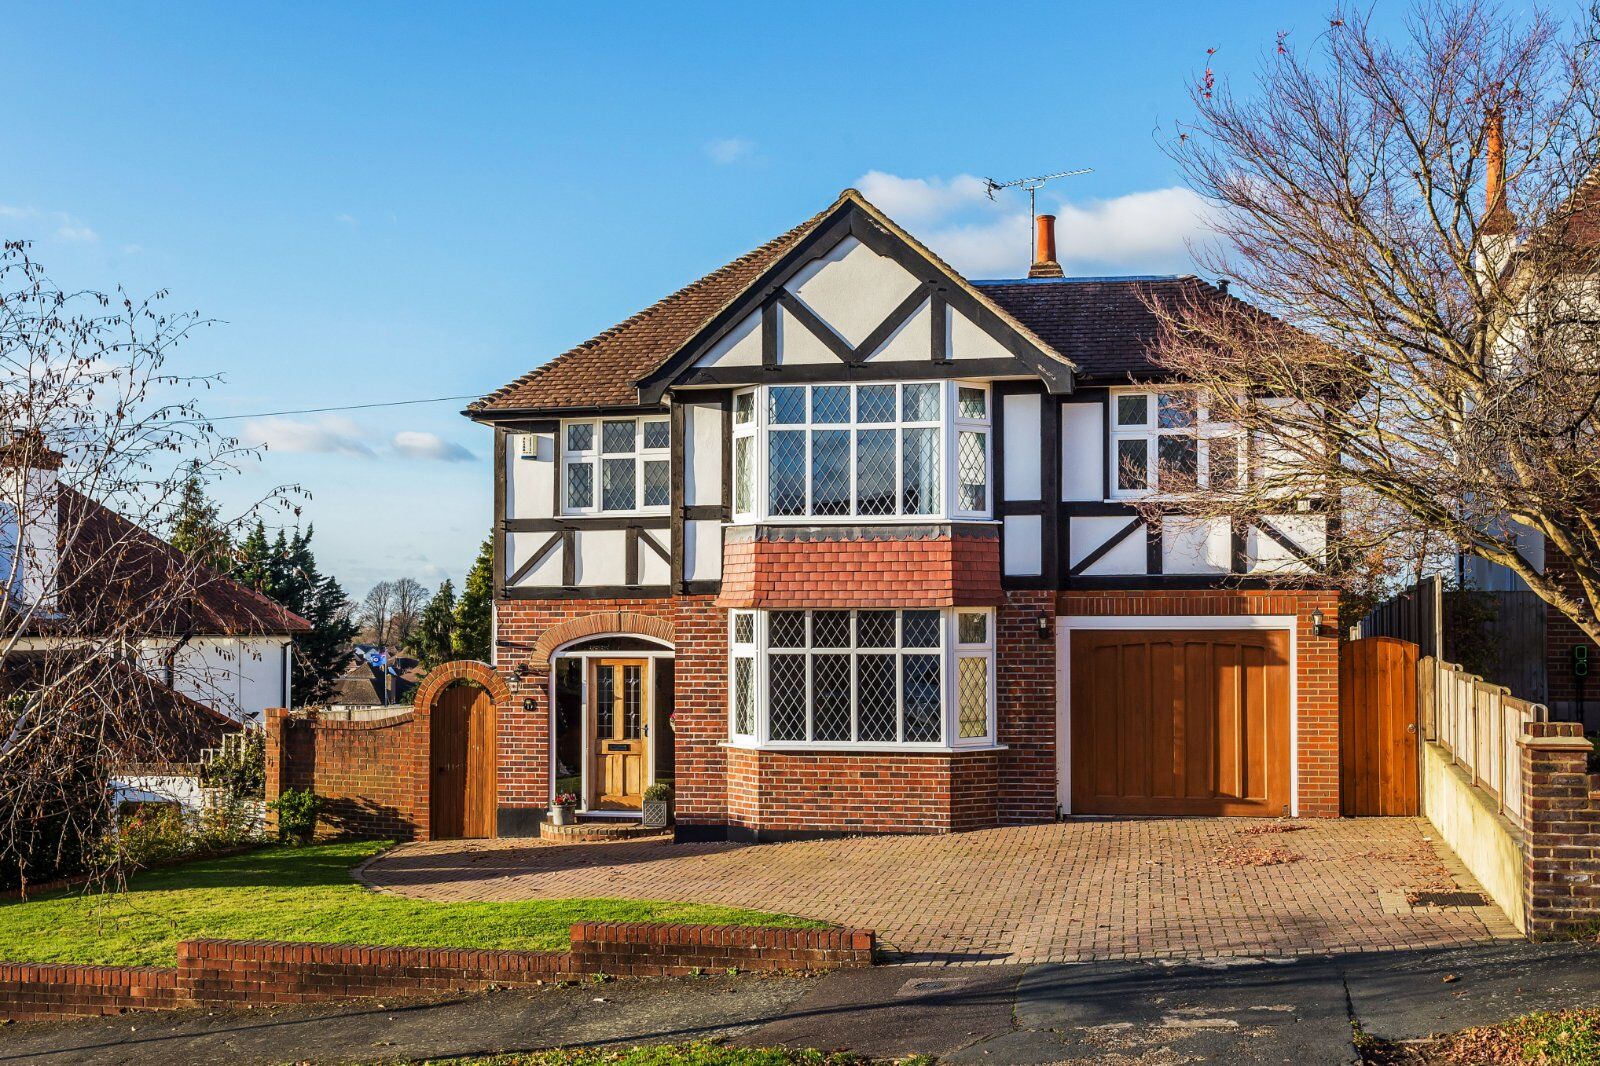 4 bedroom detached house for sale Holmwood Road, Cheam, SM2, main image